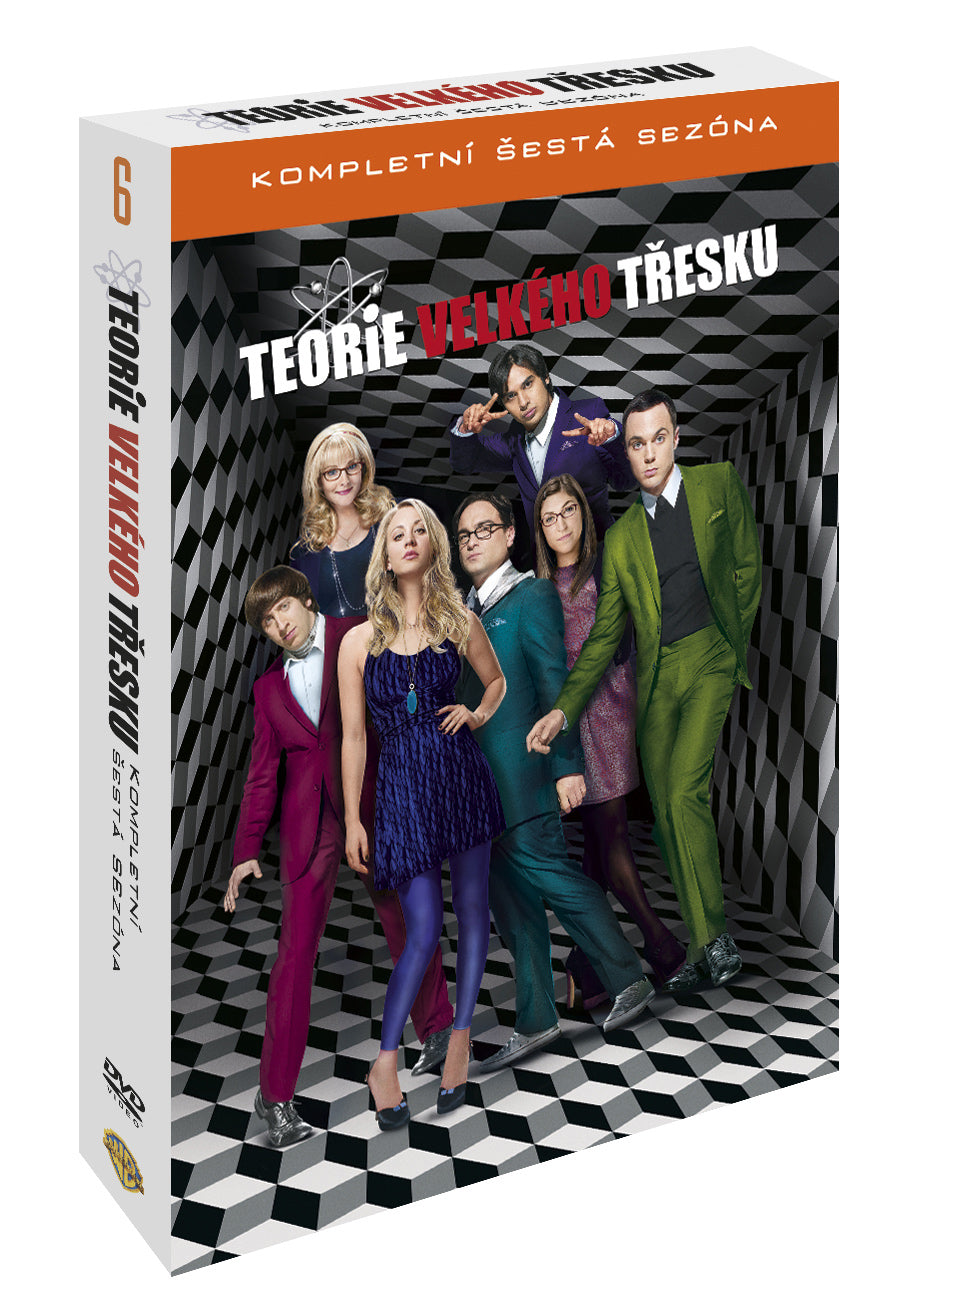 Theory of the 6. Serie 3DVD / Big Bang Theory Staffel 6